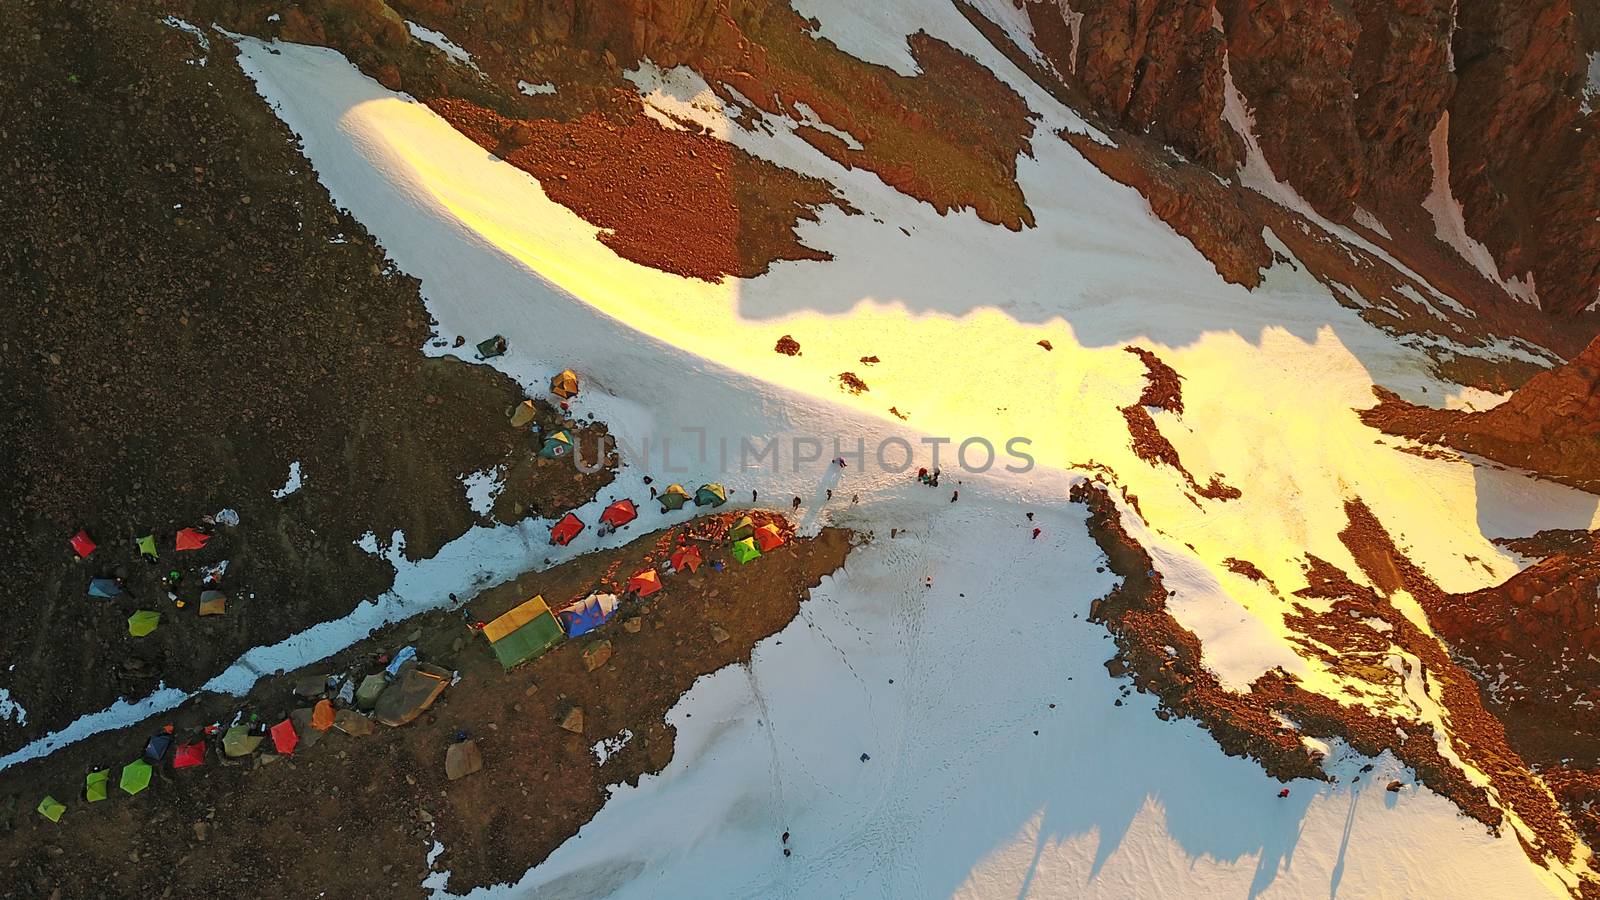 Mountaineering camp high in the snowy mountains. Epic red dawn, top view from a drone. Camp on the edge of the cliff. The snow-capped peaks, huge rocks. Preparing to climb the peak. Lots of tents.